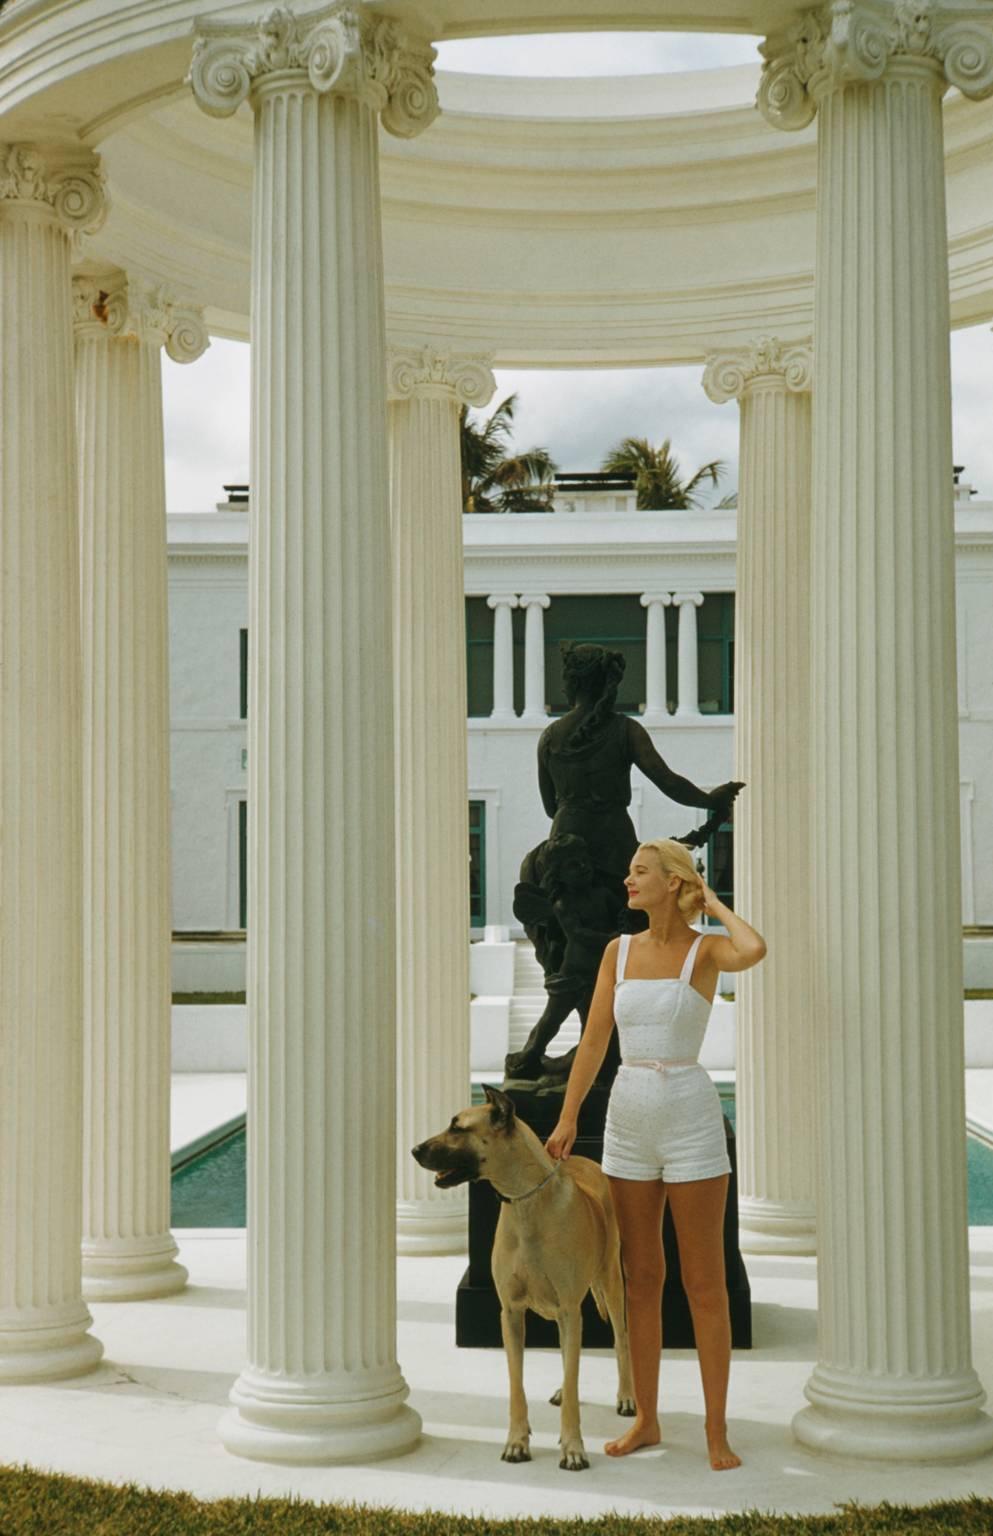 'C. Z. Guest' Palm Beach 1955

Slim Aarons Limited Edition Estate Stamped Print

American socialite Mrs. Winston F. C. Guest (aka C. Z. Guest, 1920 - 2003) with a Great Dane at her ocean-front estate, Villa Artemis, in Palm Beach, Florida,